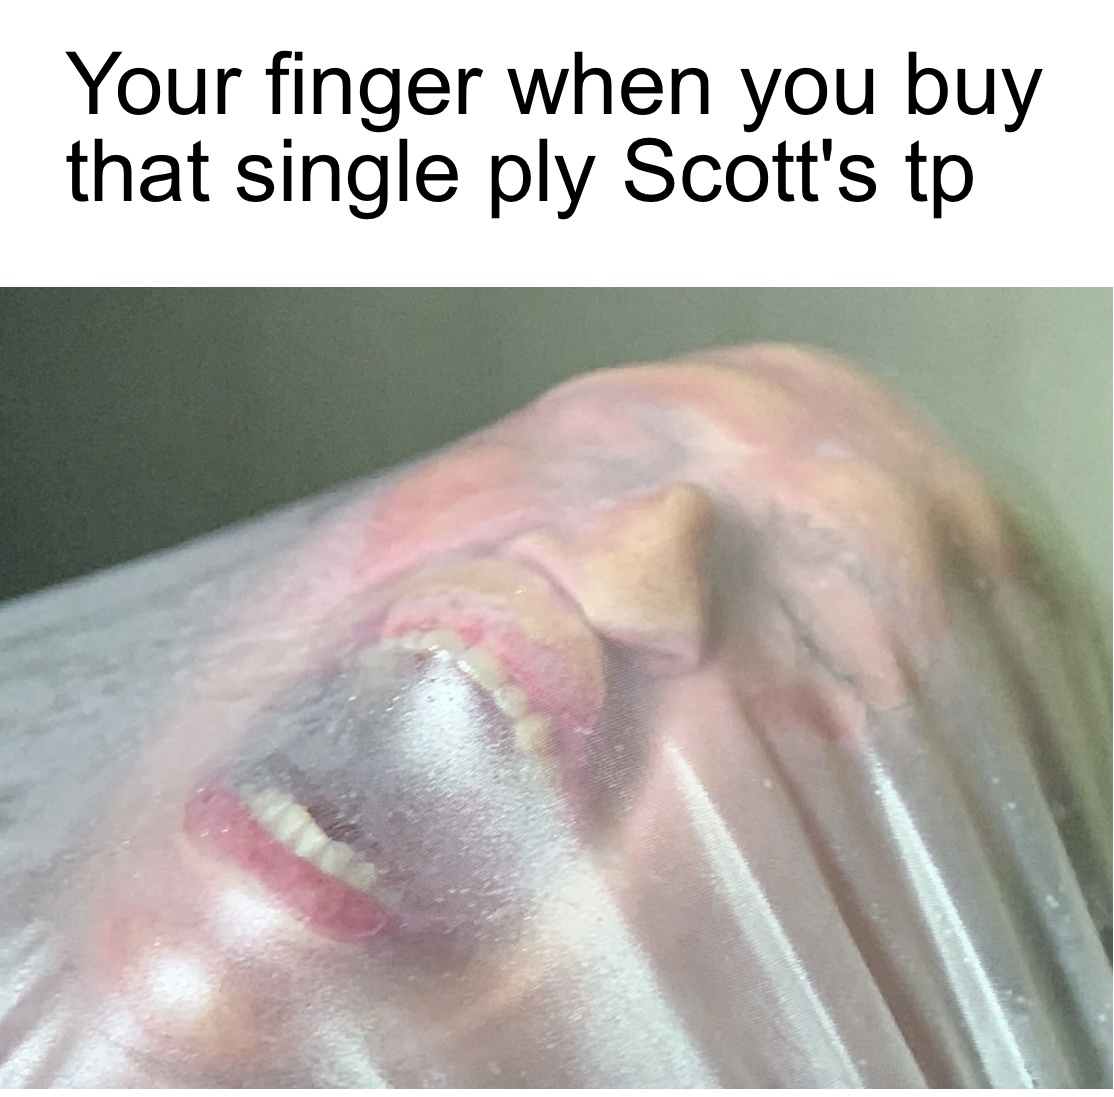 lip - Your finger when you buy that single ply Scott's tp